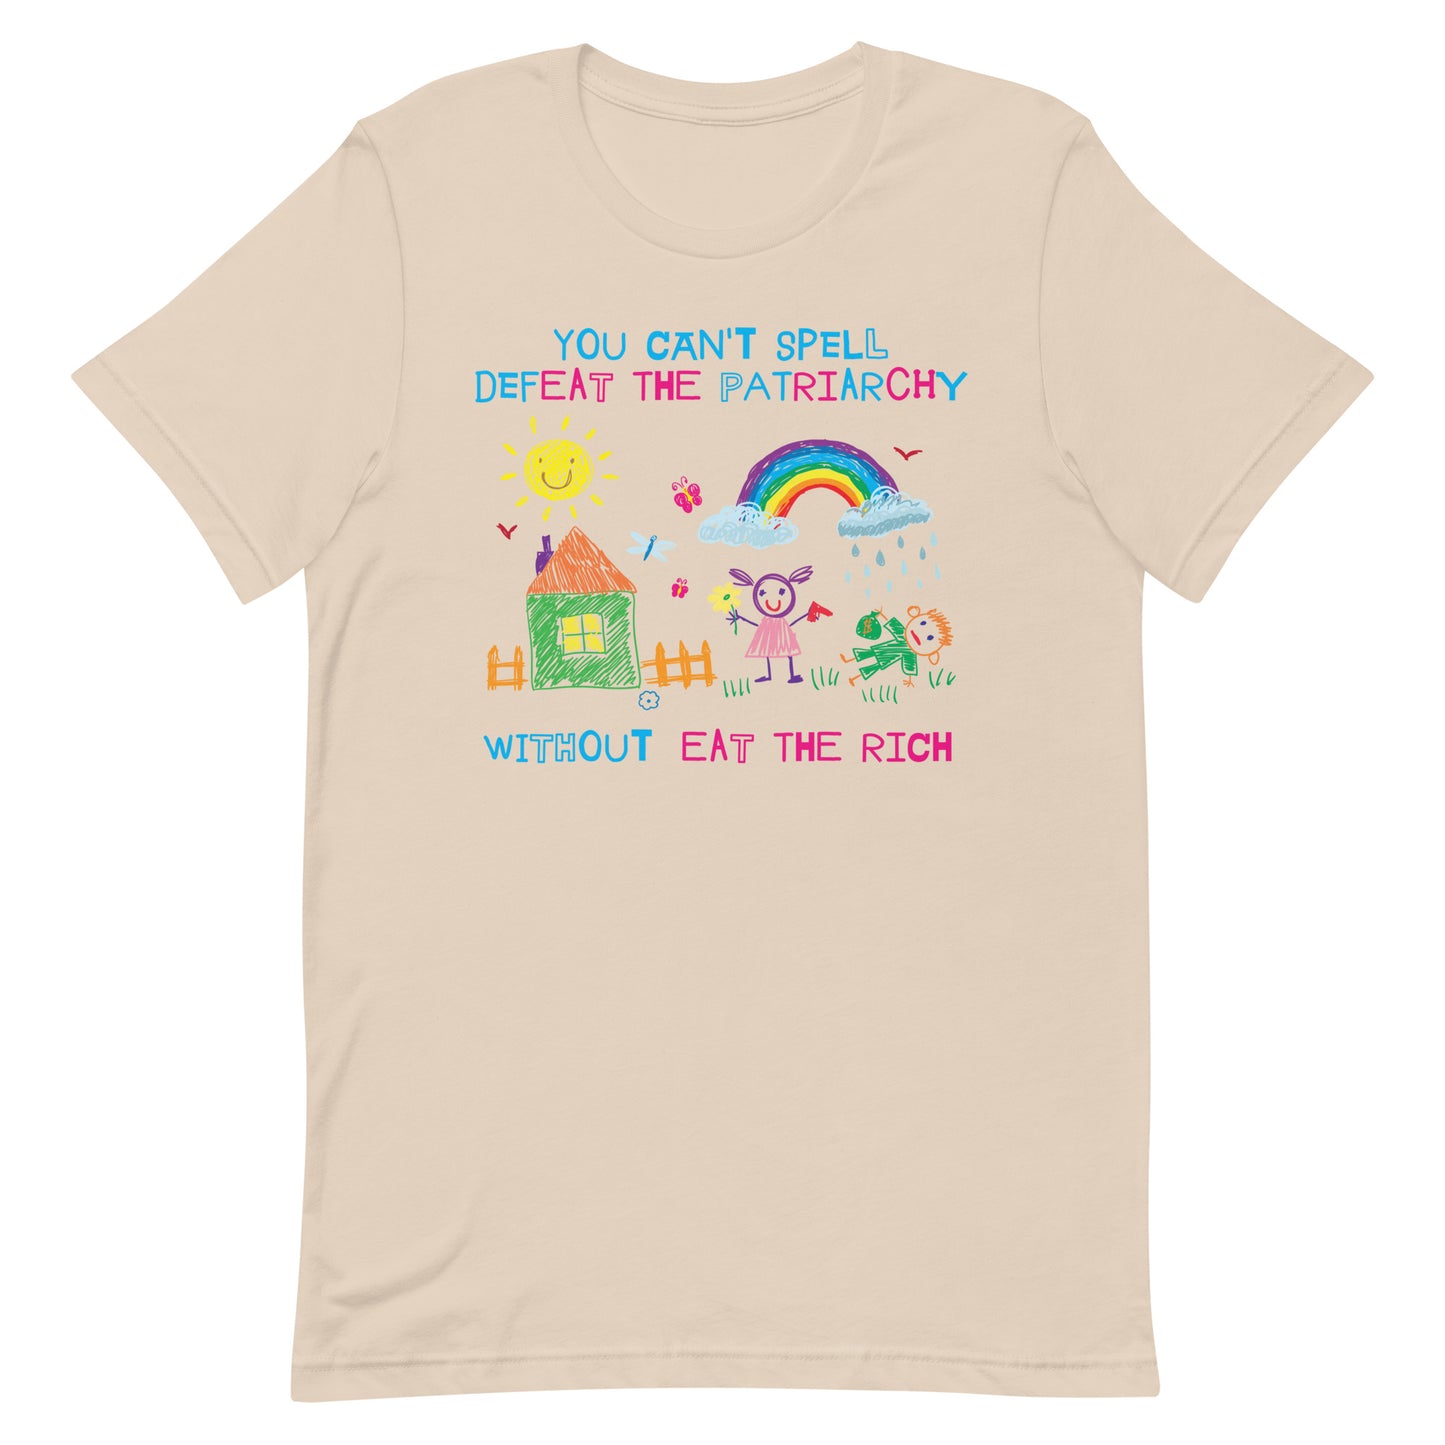 You Can't Spell Defeat the Patriarchy Without Eat the Rich Unisex t-shirt